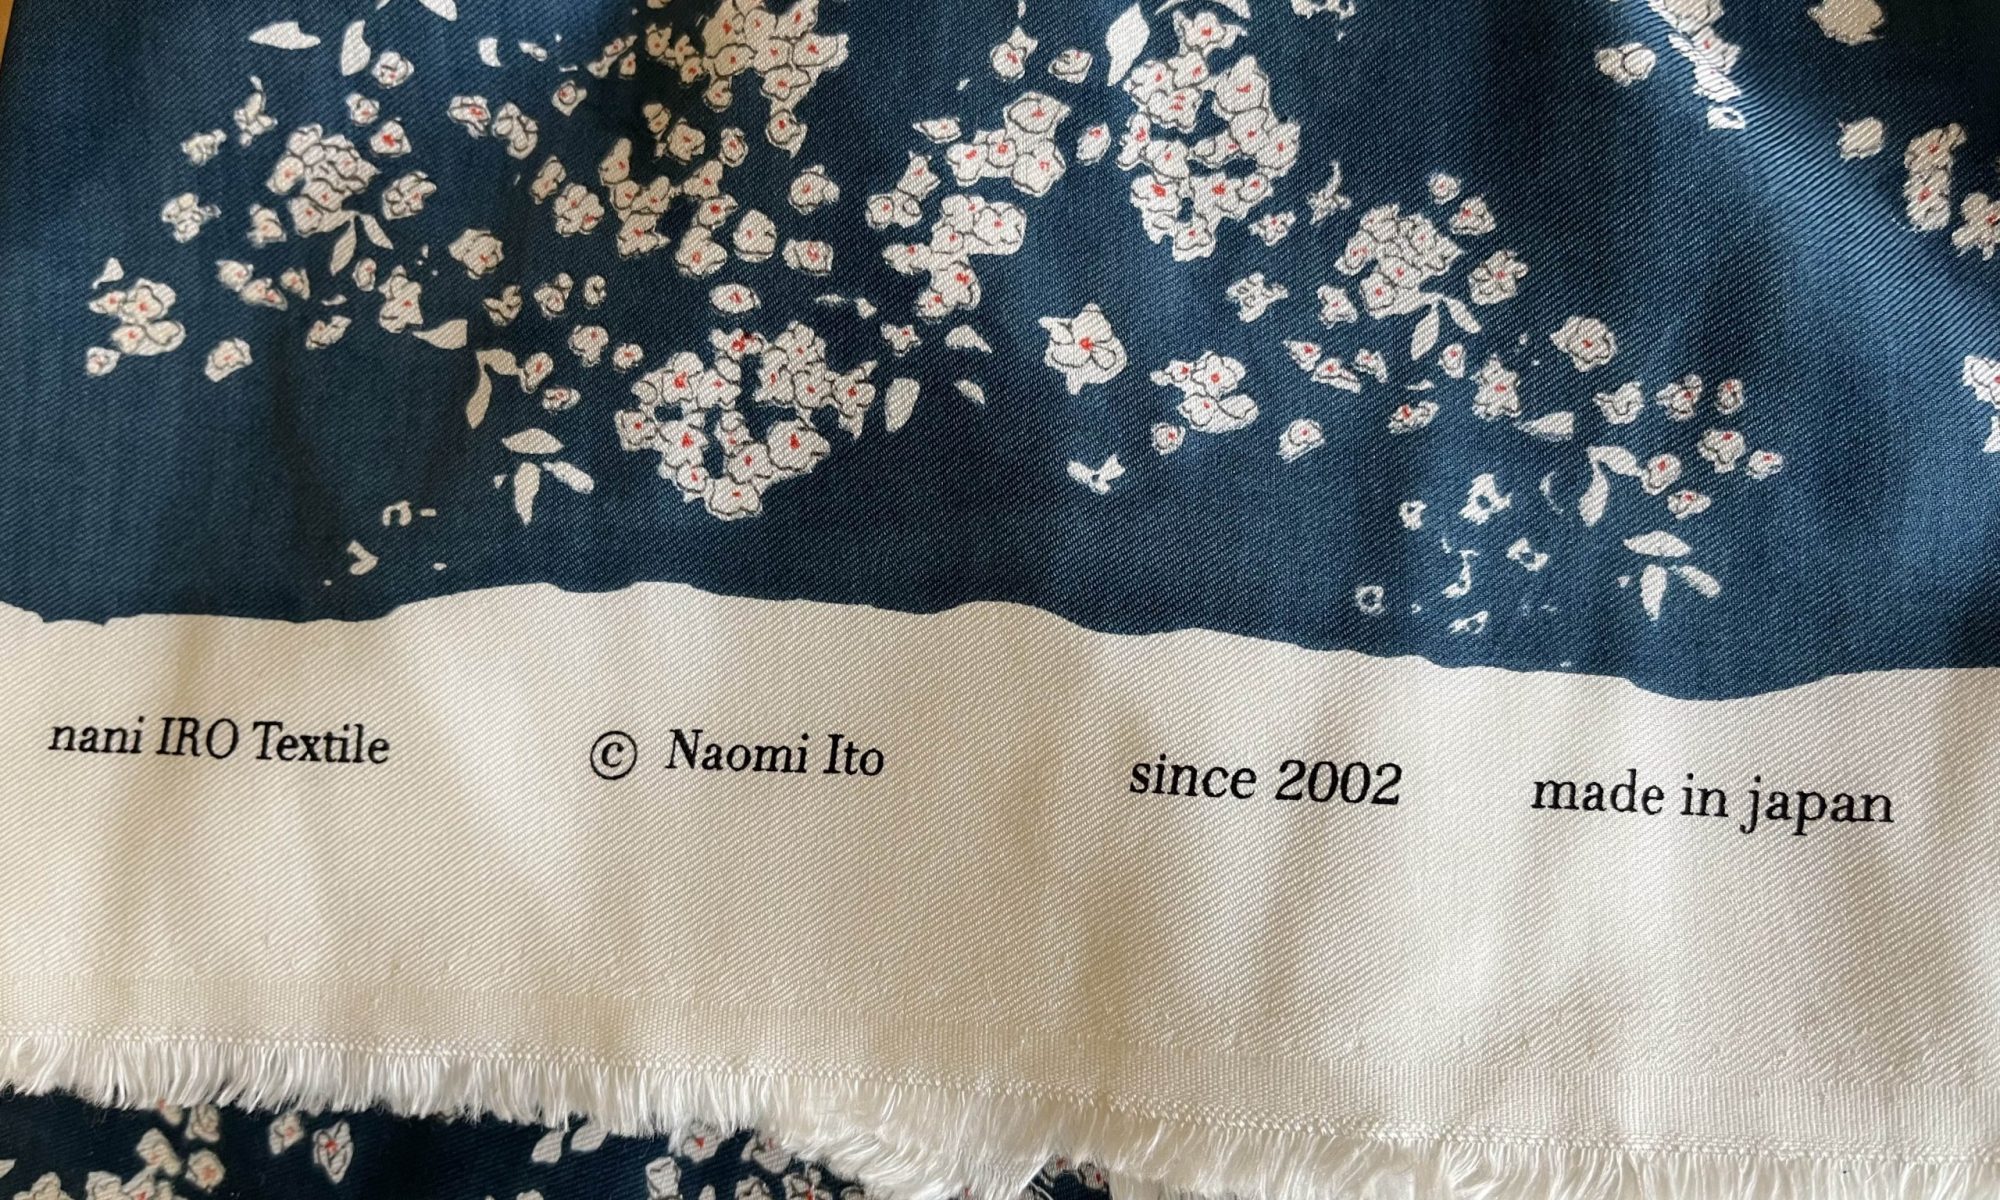 Floral Nani Iro fabric with text printed: made in Japan